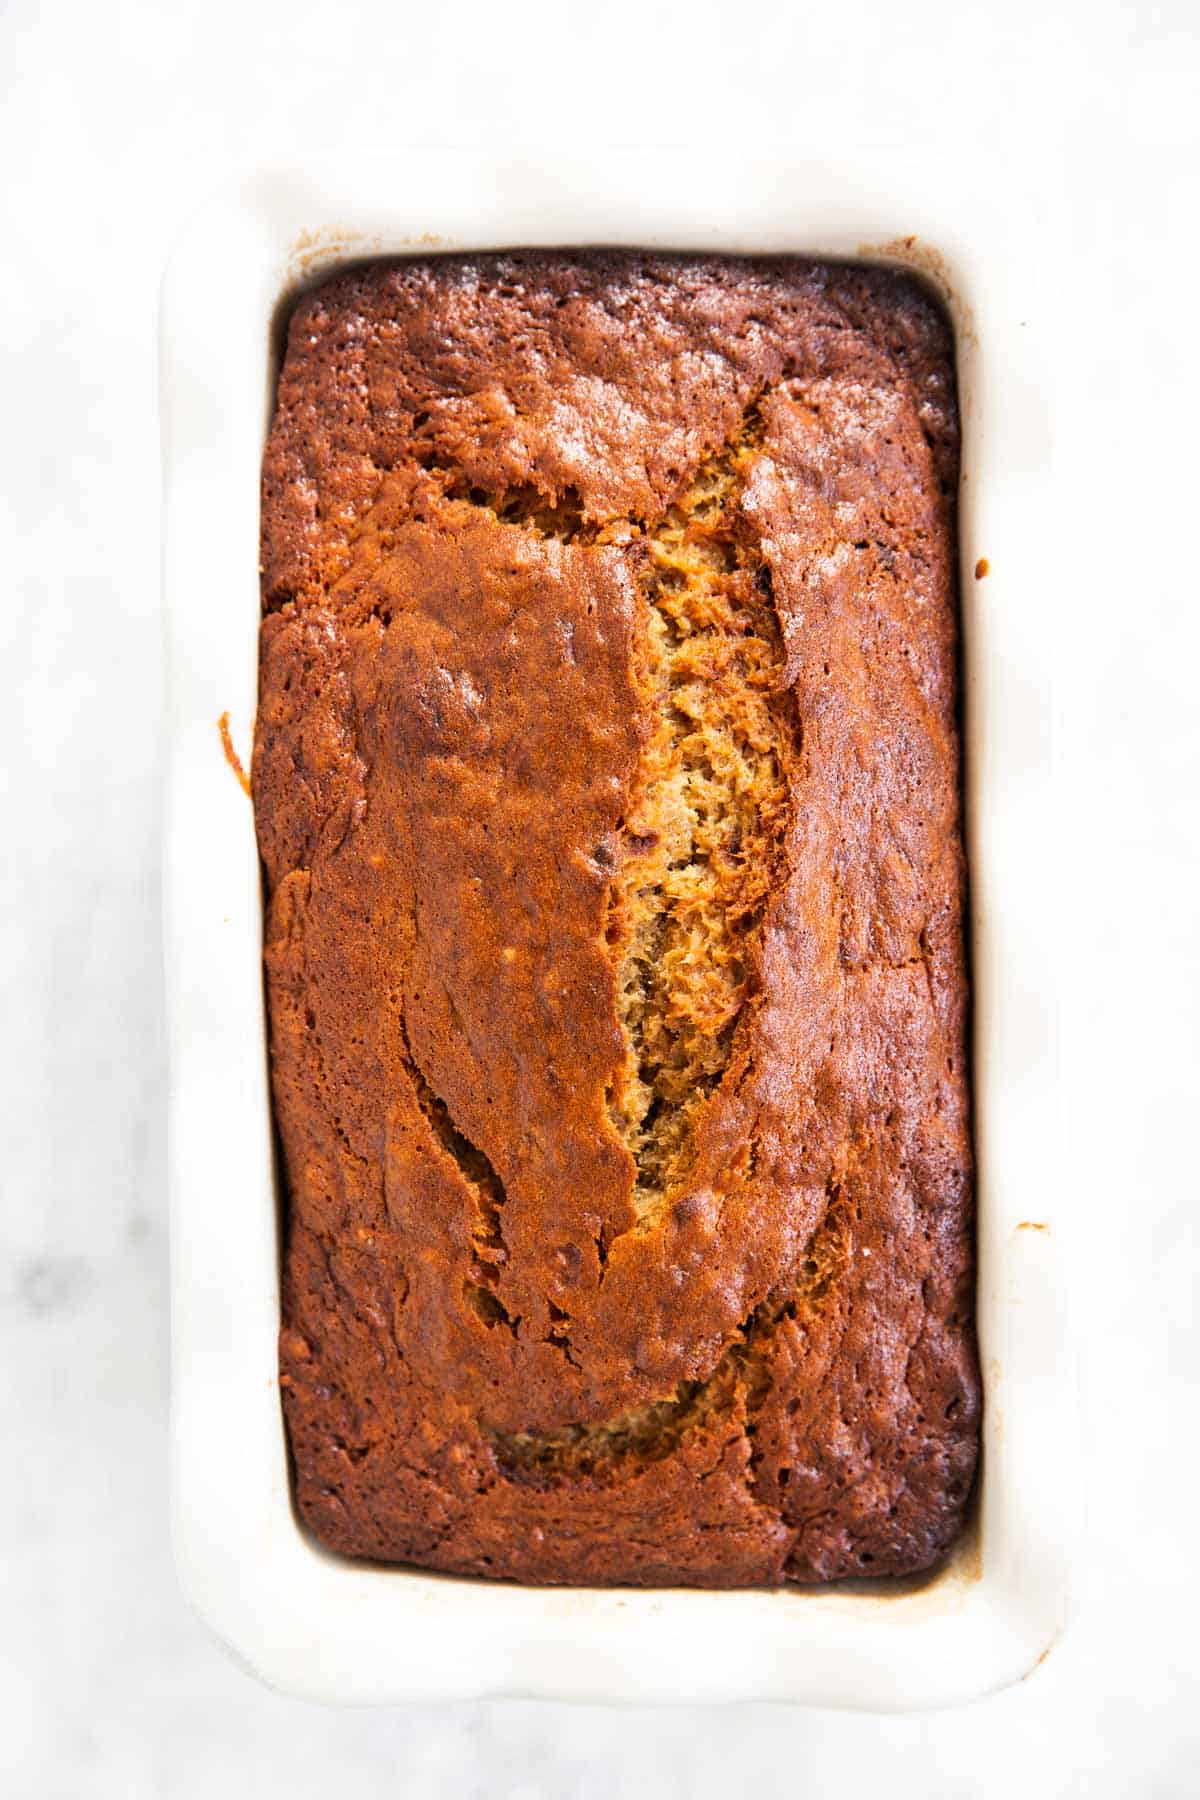 baked banana bread in white ceramic loaf pan sitting on marble surface